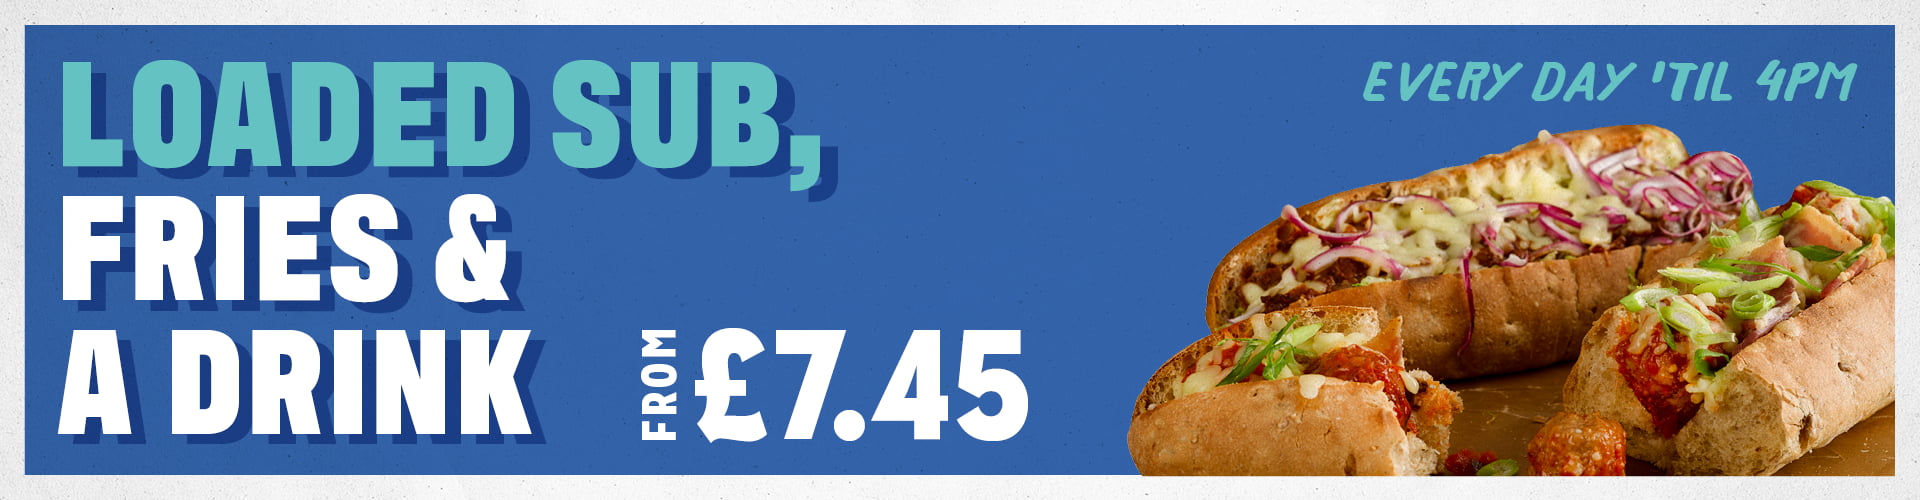 Loaded Sub, Fries & A Drink - From £7.45. Every Day Til 4pm.